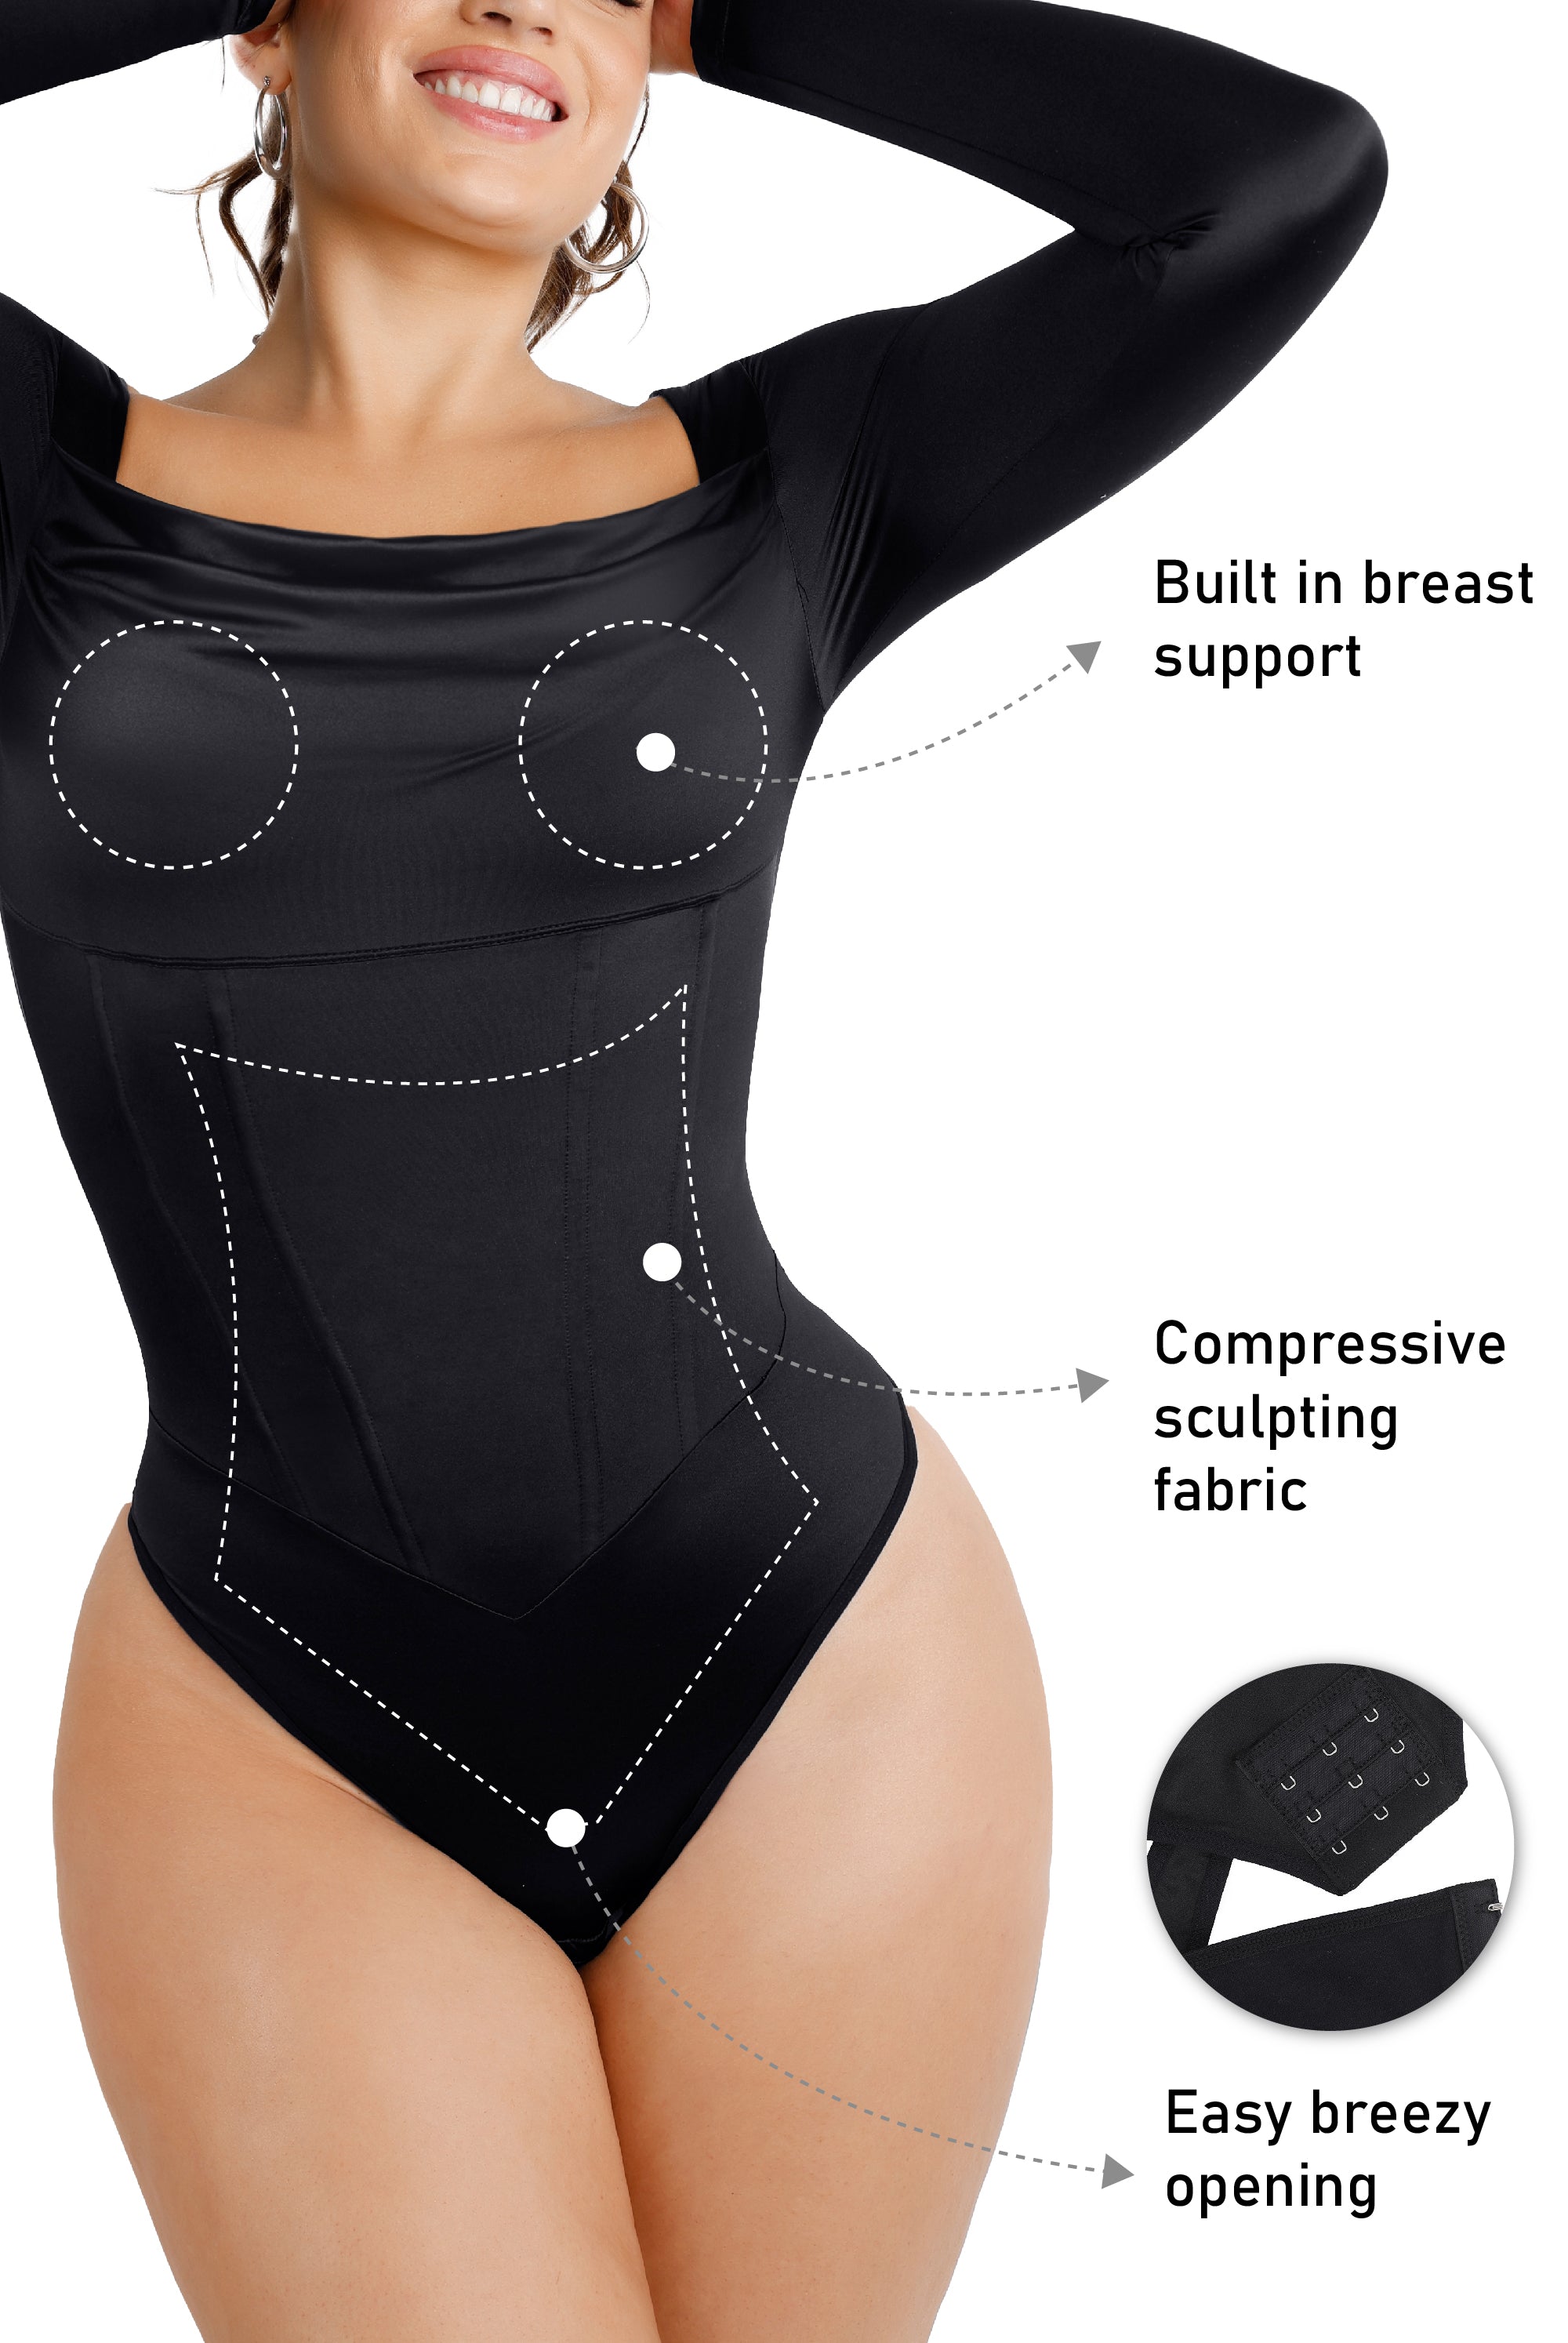 Shop Bodysuits & Corsets - Shaping Bodysuits for Full-Figured Ladies -  Curvy Bras